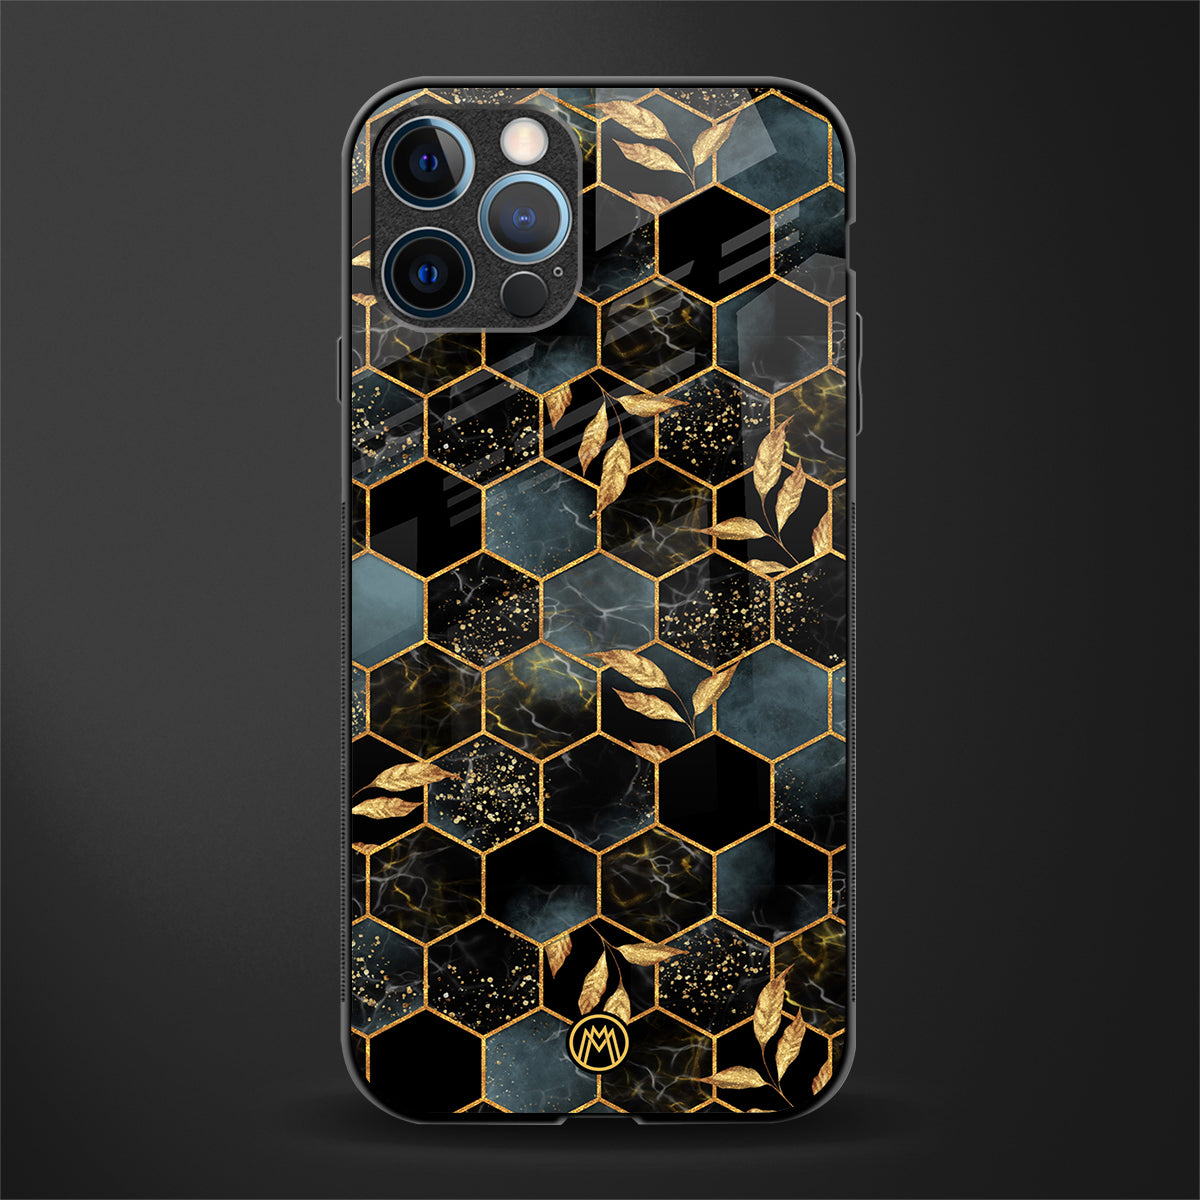 black blue tile marble glass case for iphone 12 pro max image